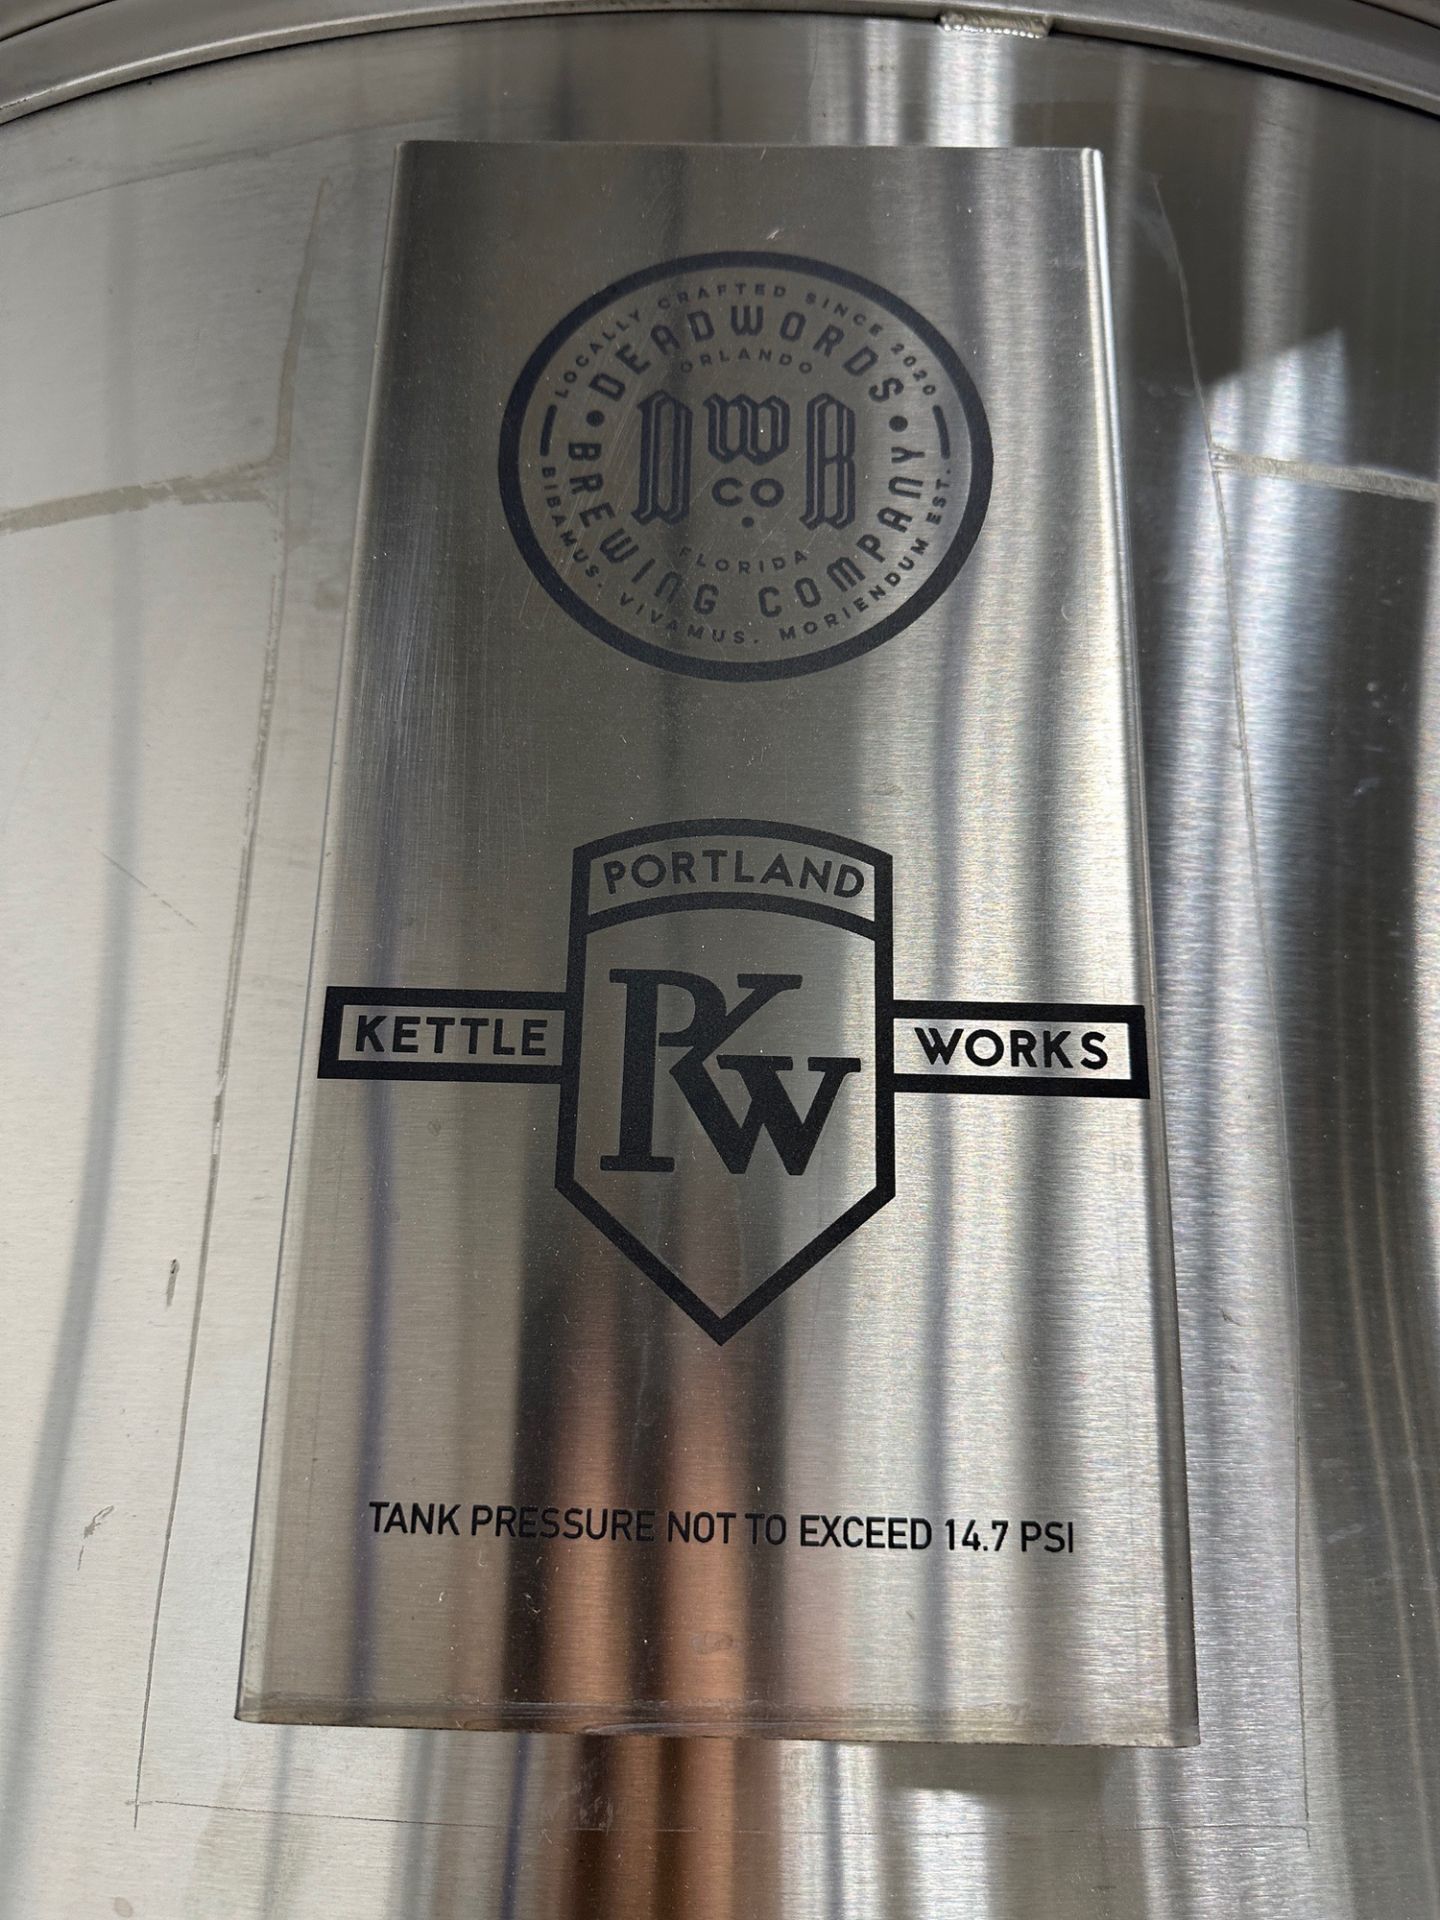 Portland Kettle Works Stainless Steel Grist Case - Image 2 of 3